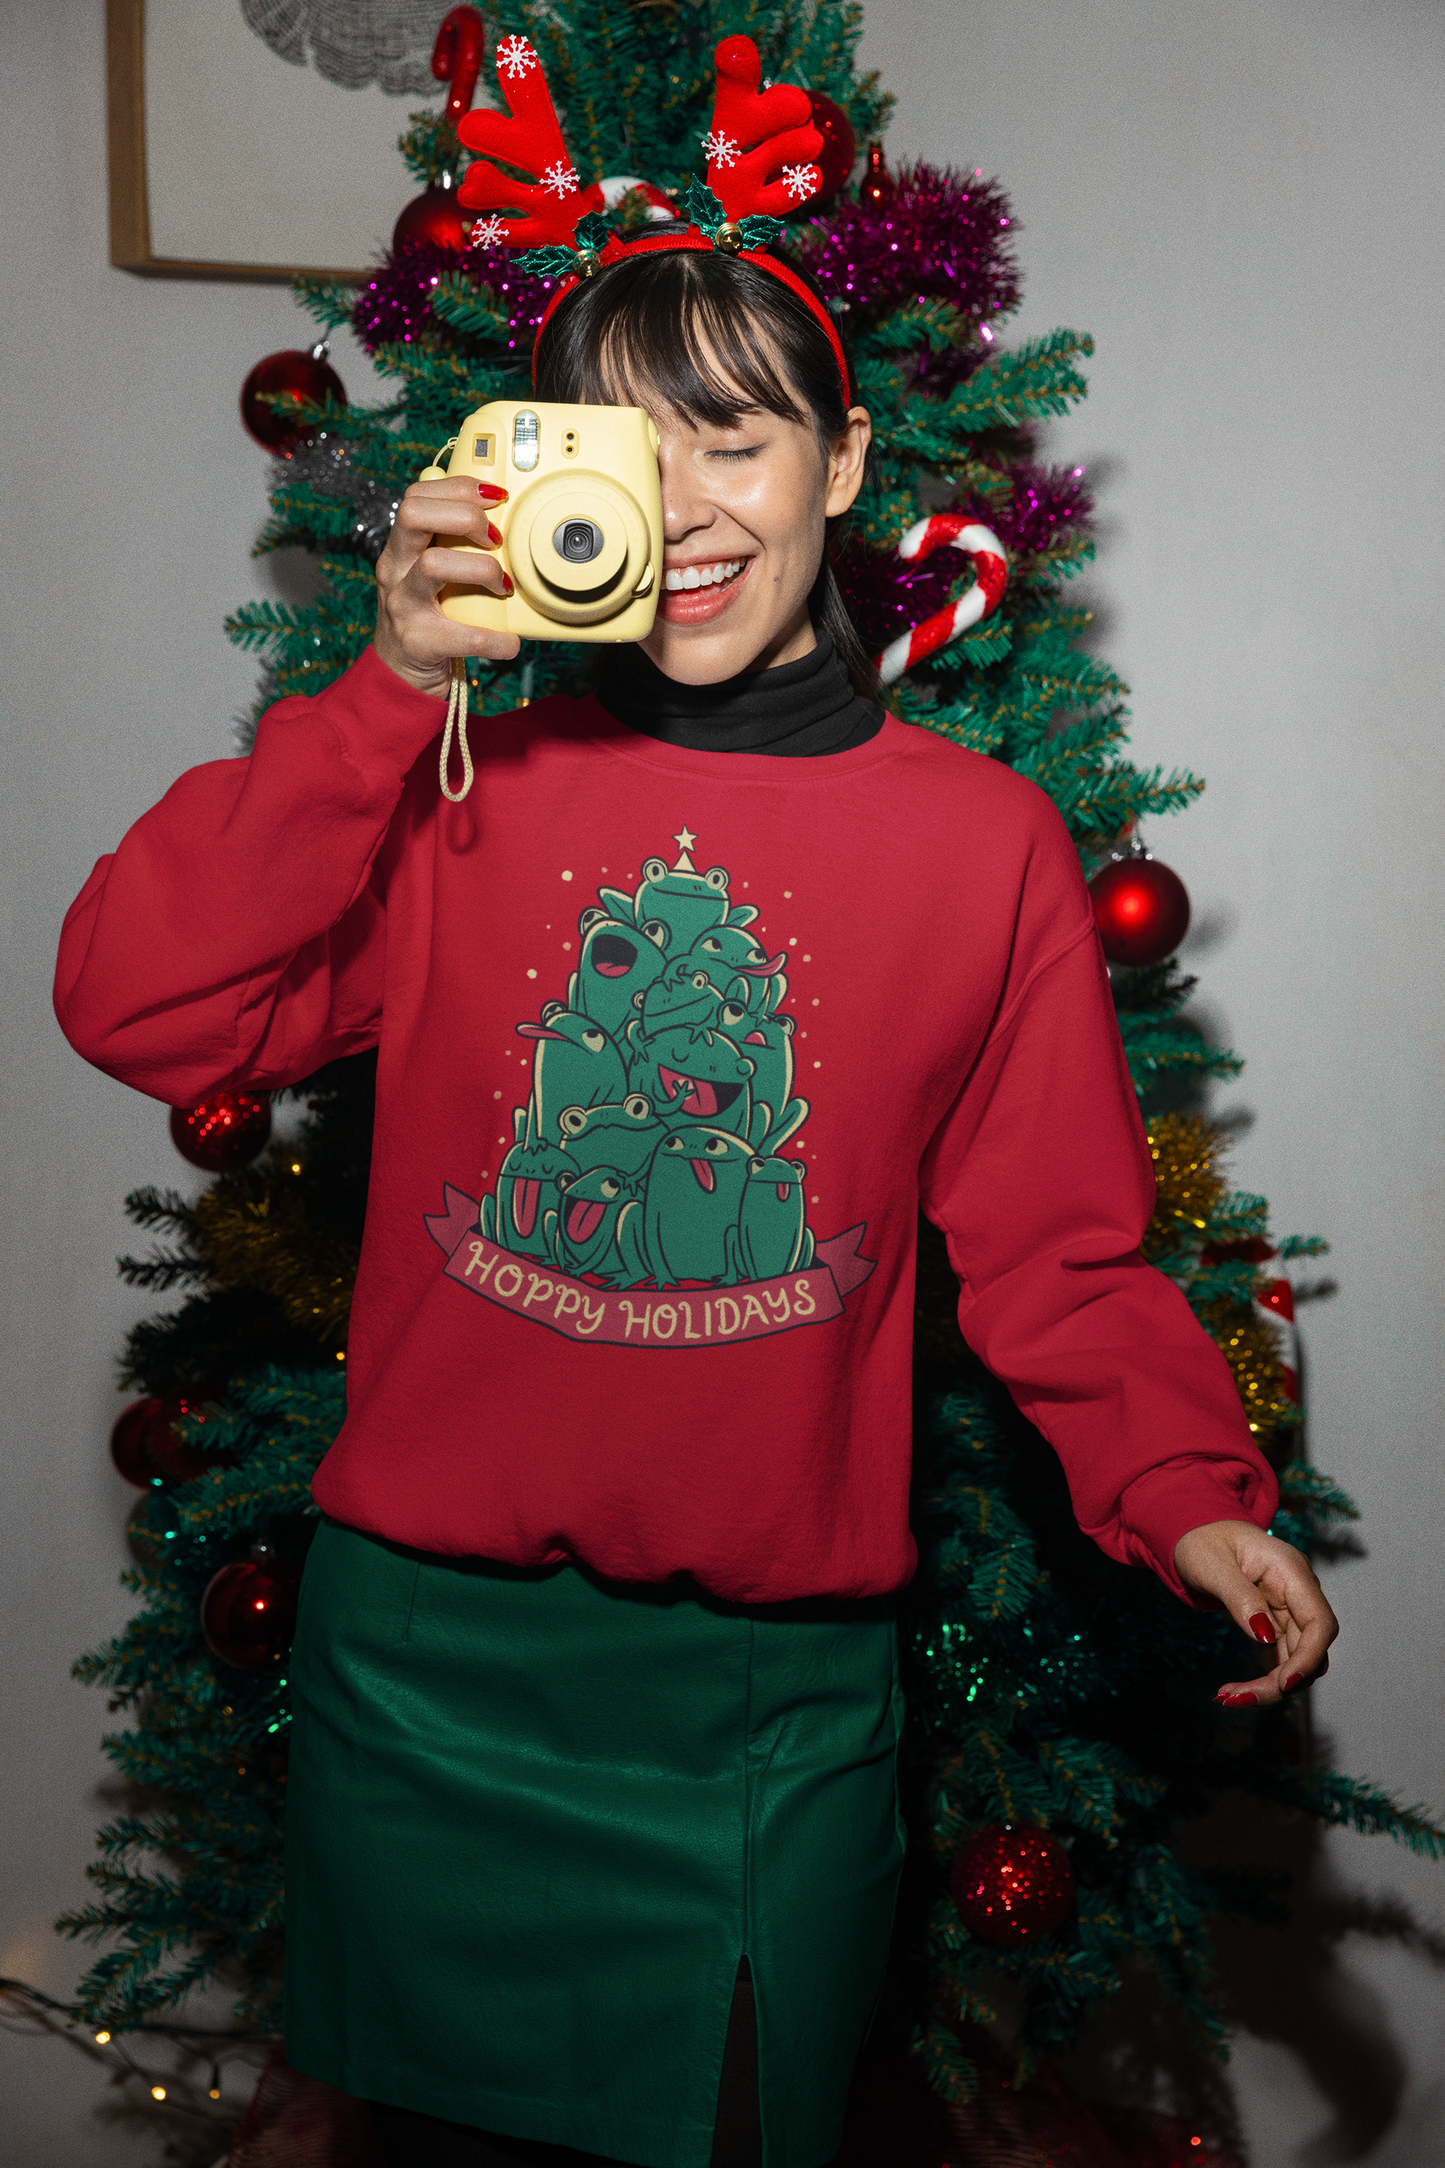 Hoppy Holidays - Funny Frog Christmas Sweater for Christmas Party XMas Day